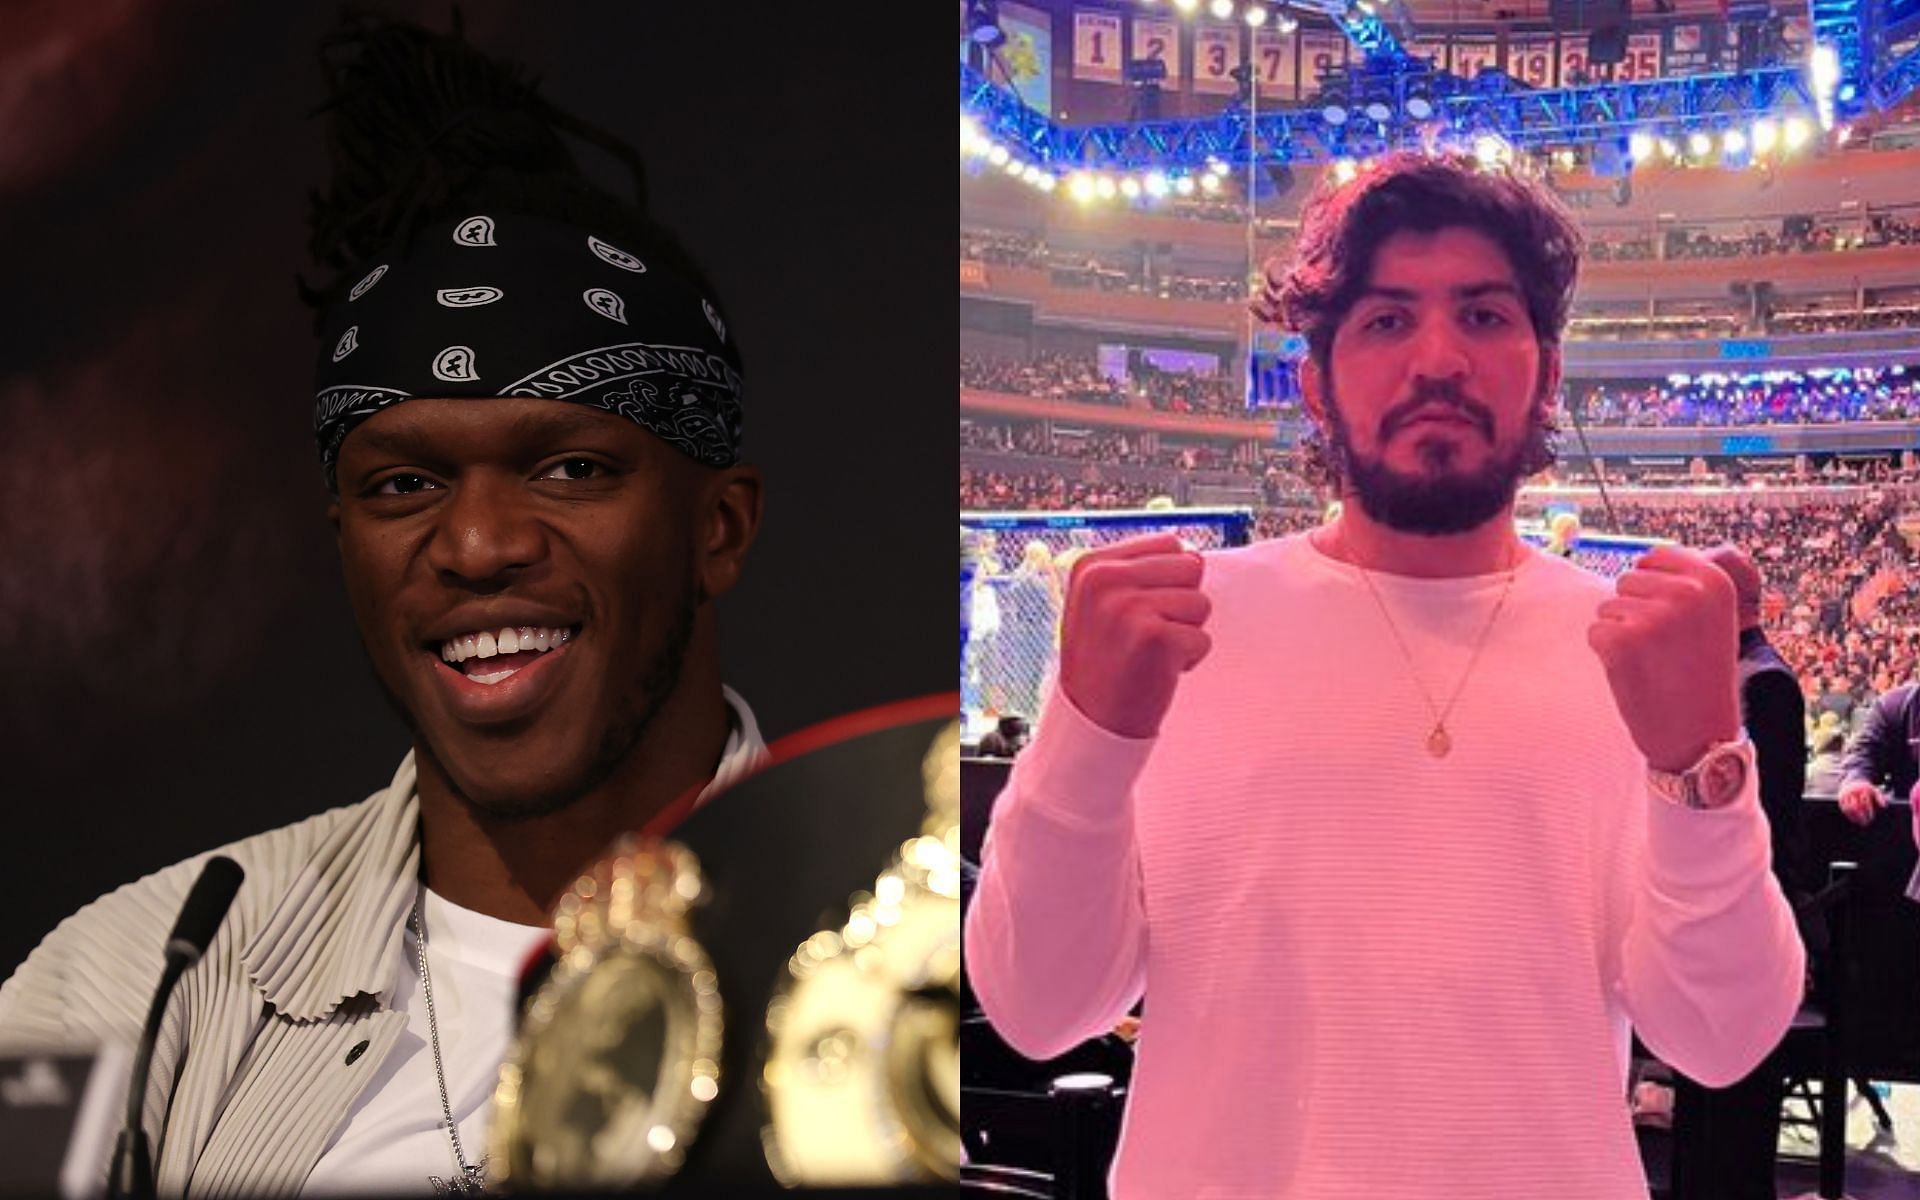 KSI (left) and Dillon Danis (right) (Image credits Getty Images and @dillondanis on Twitter)